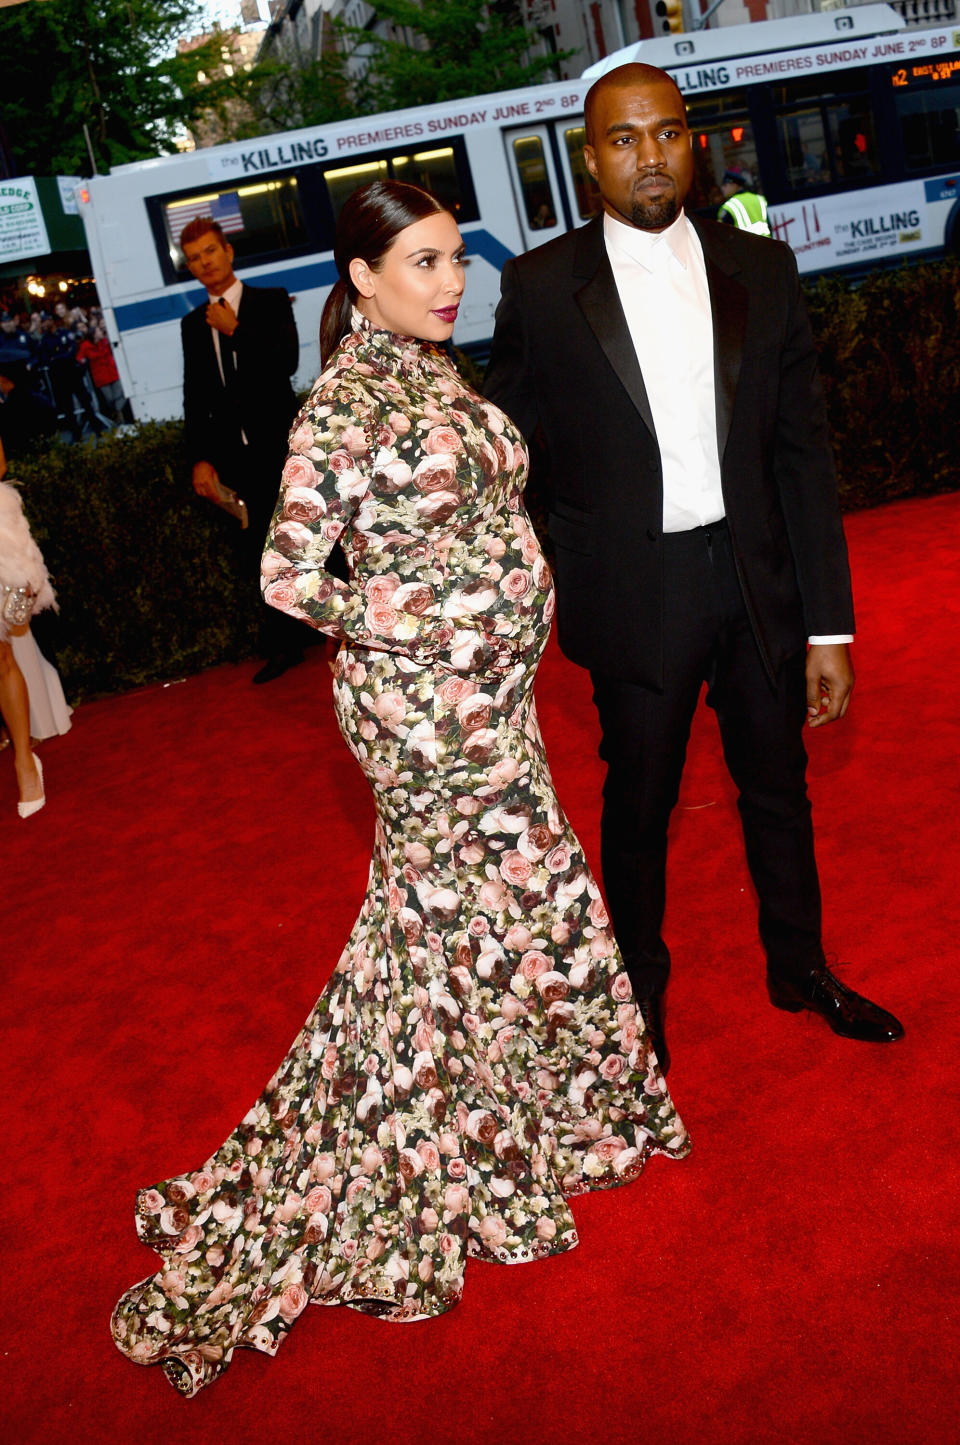 NEW YORK, NY - MAY 06: Kim Kardashian and Kanye West attend the Costume Institute Gala for the 'PUNK: Chaos to Couture' exhibition at the Metropolitan Museum of Art on May 6, 2013 in New York City. (Photo by Larry Busacca/Getty Images)